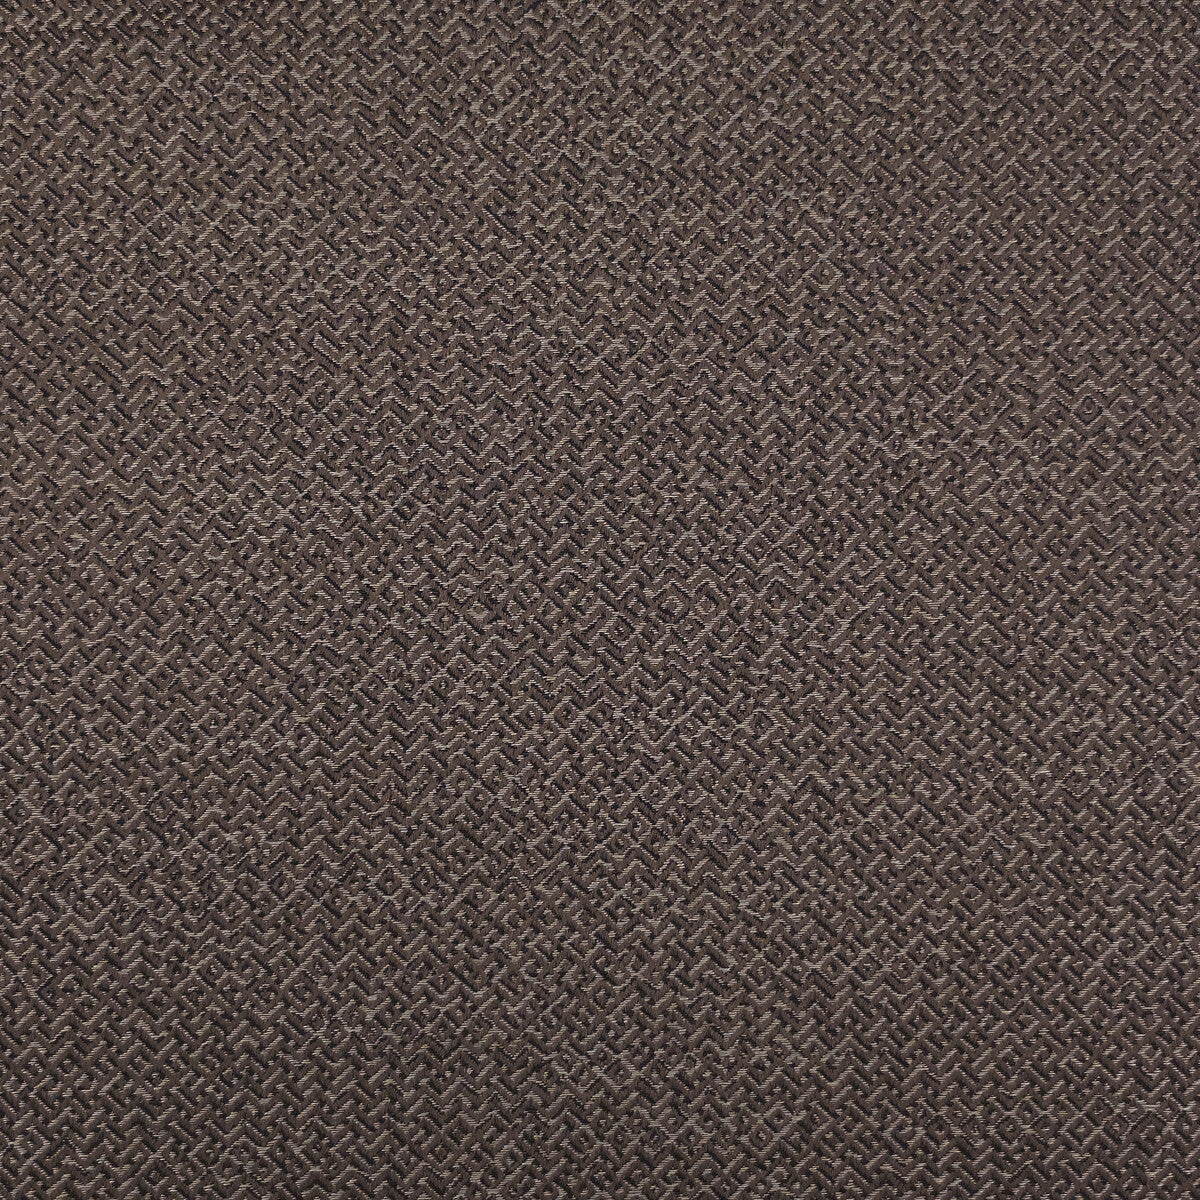 Sublime fabric in 1 color - pattern LZ-30203.01.0 - by Kravet Design in the Lizzo collection